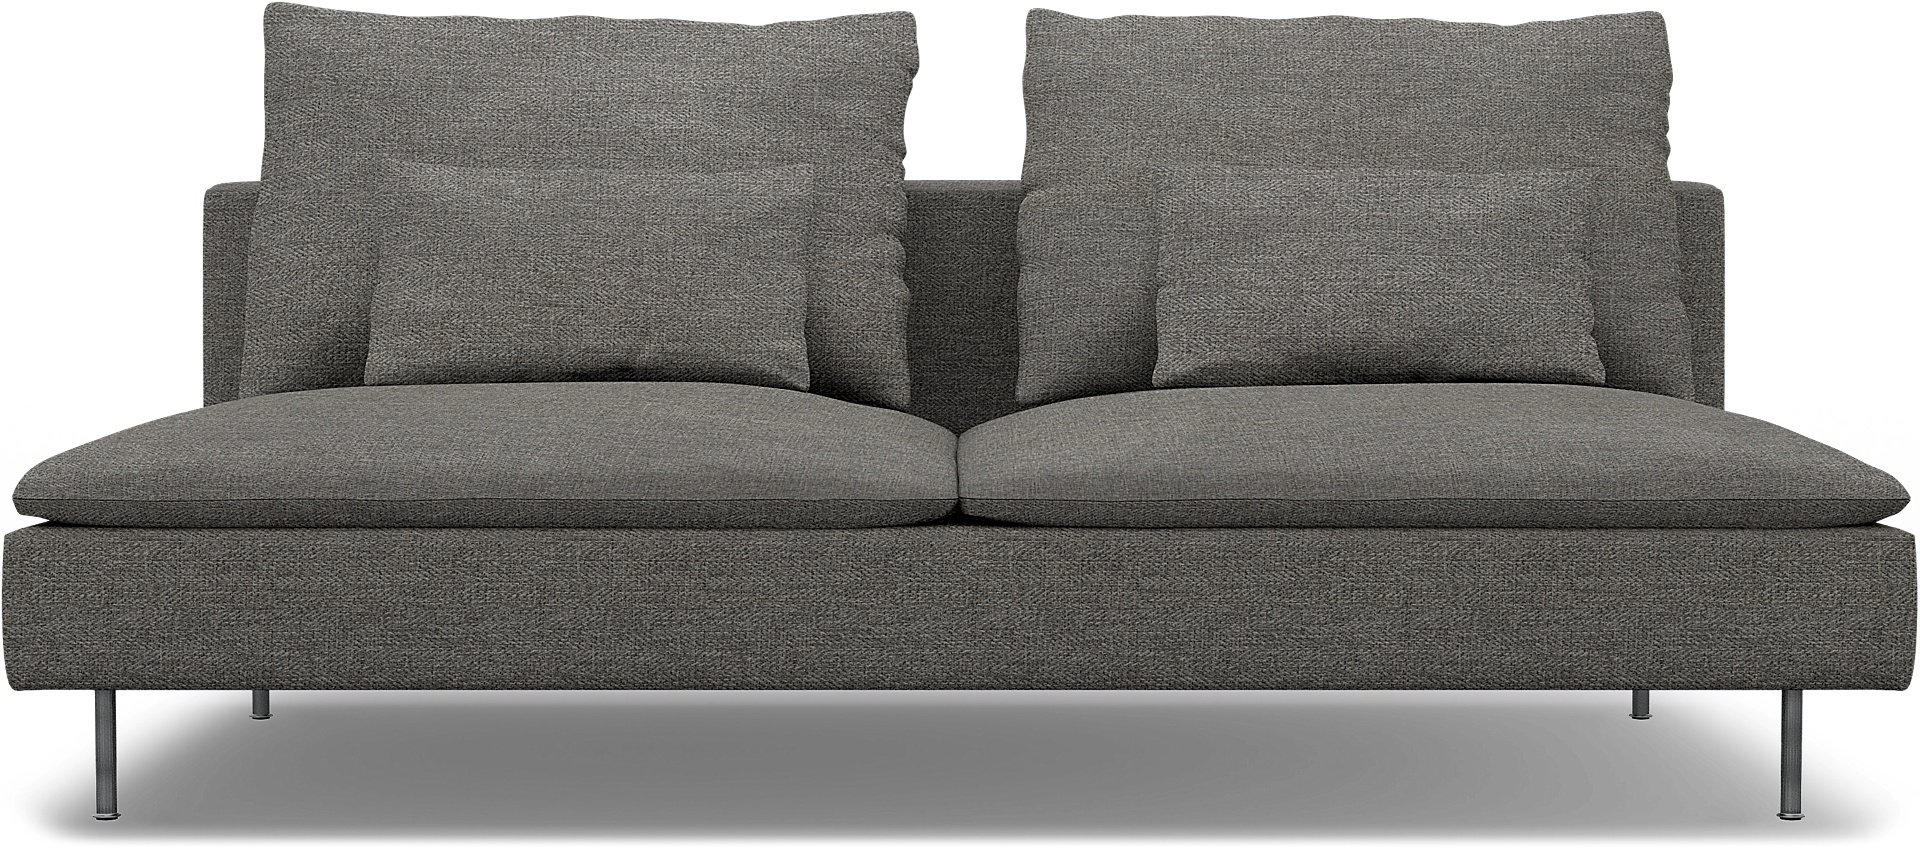 IKEA - Soderhamn Sofa Bed Section Cover, Taupe, Boucle & Texture - Bemz